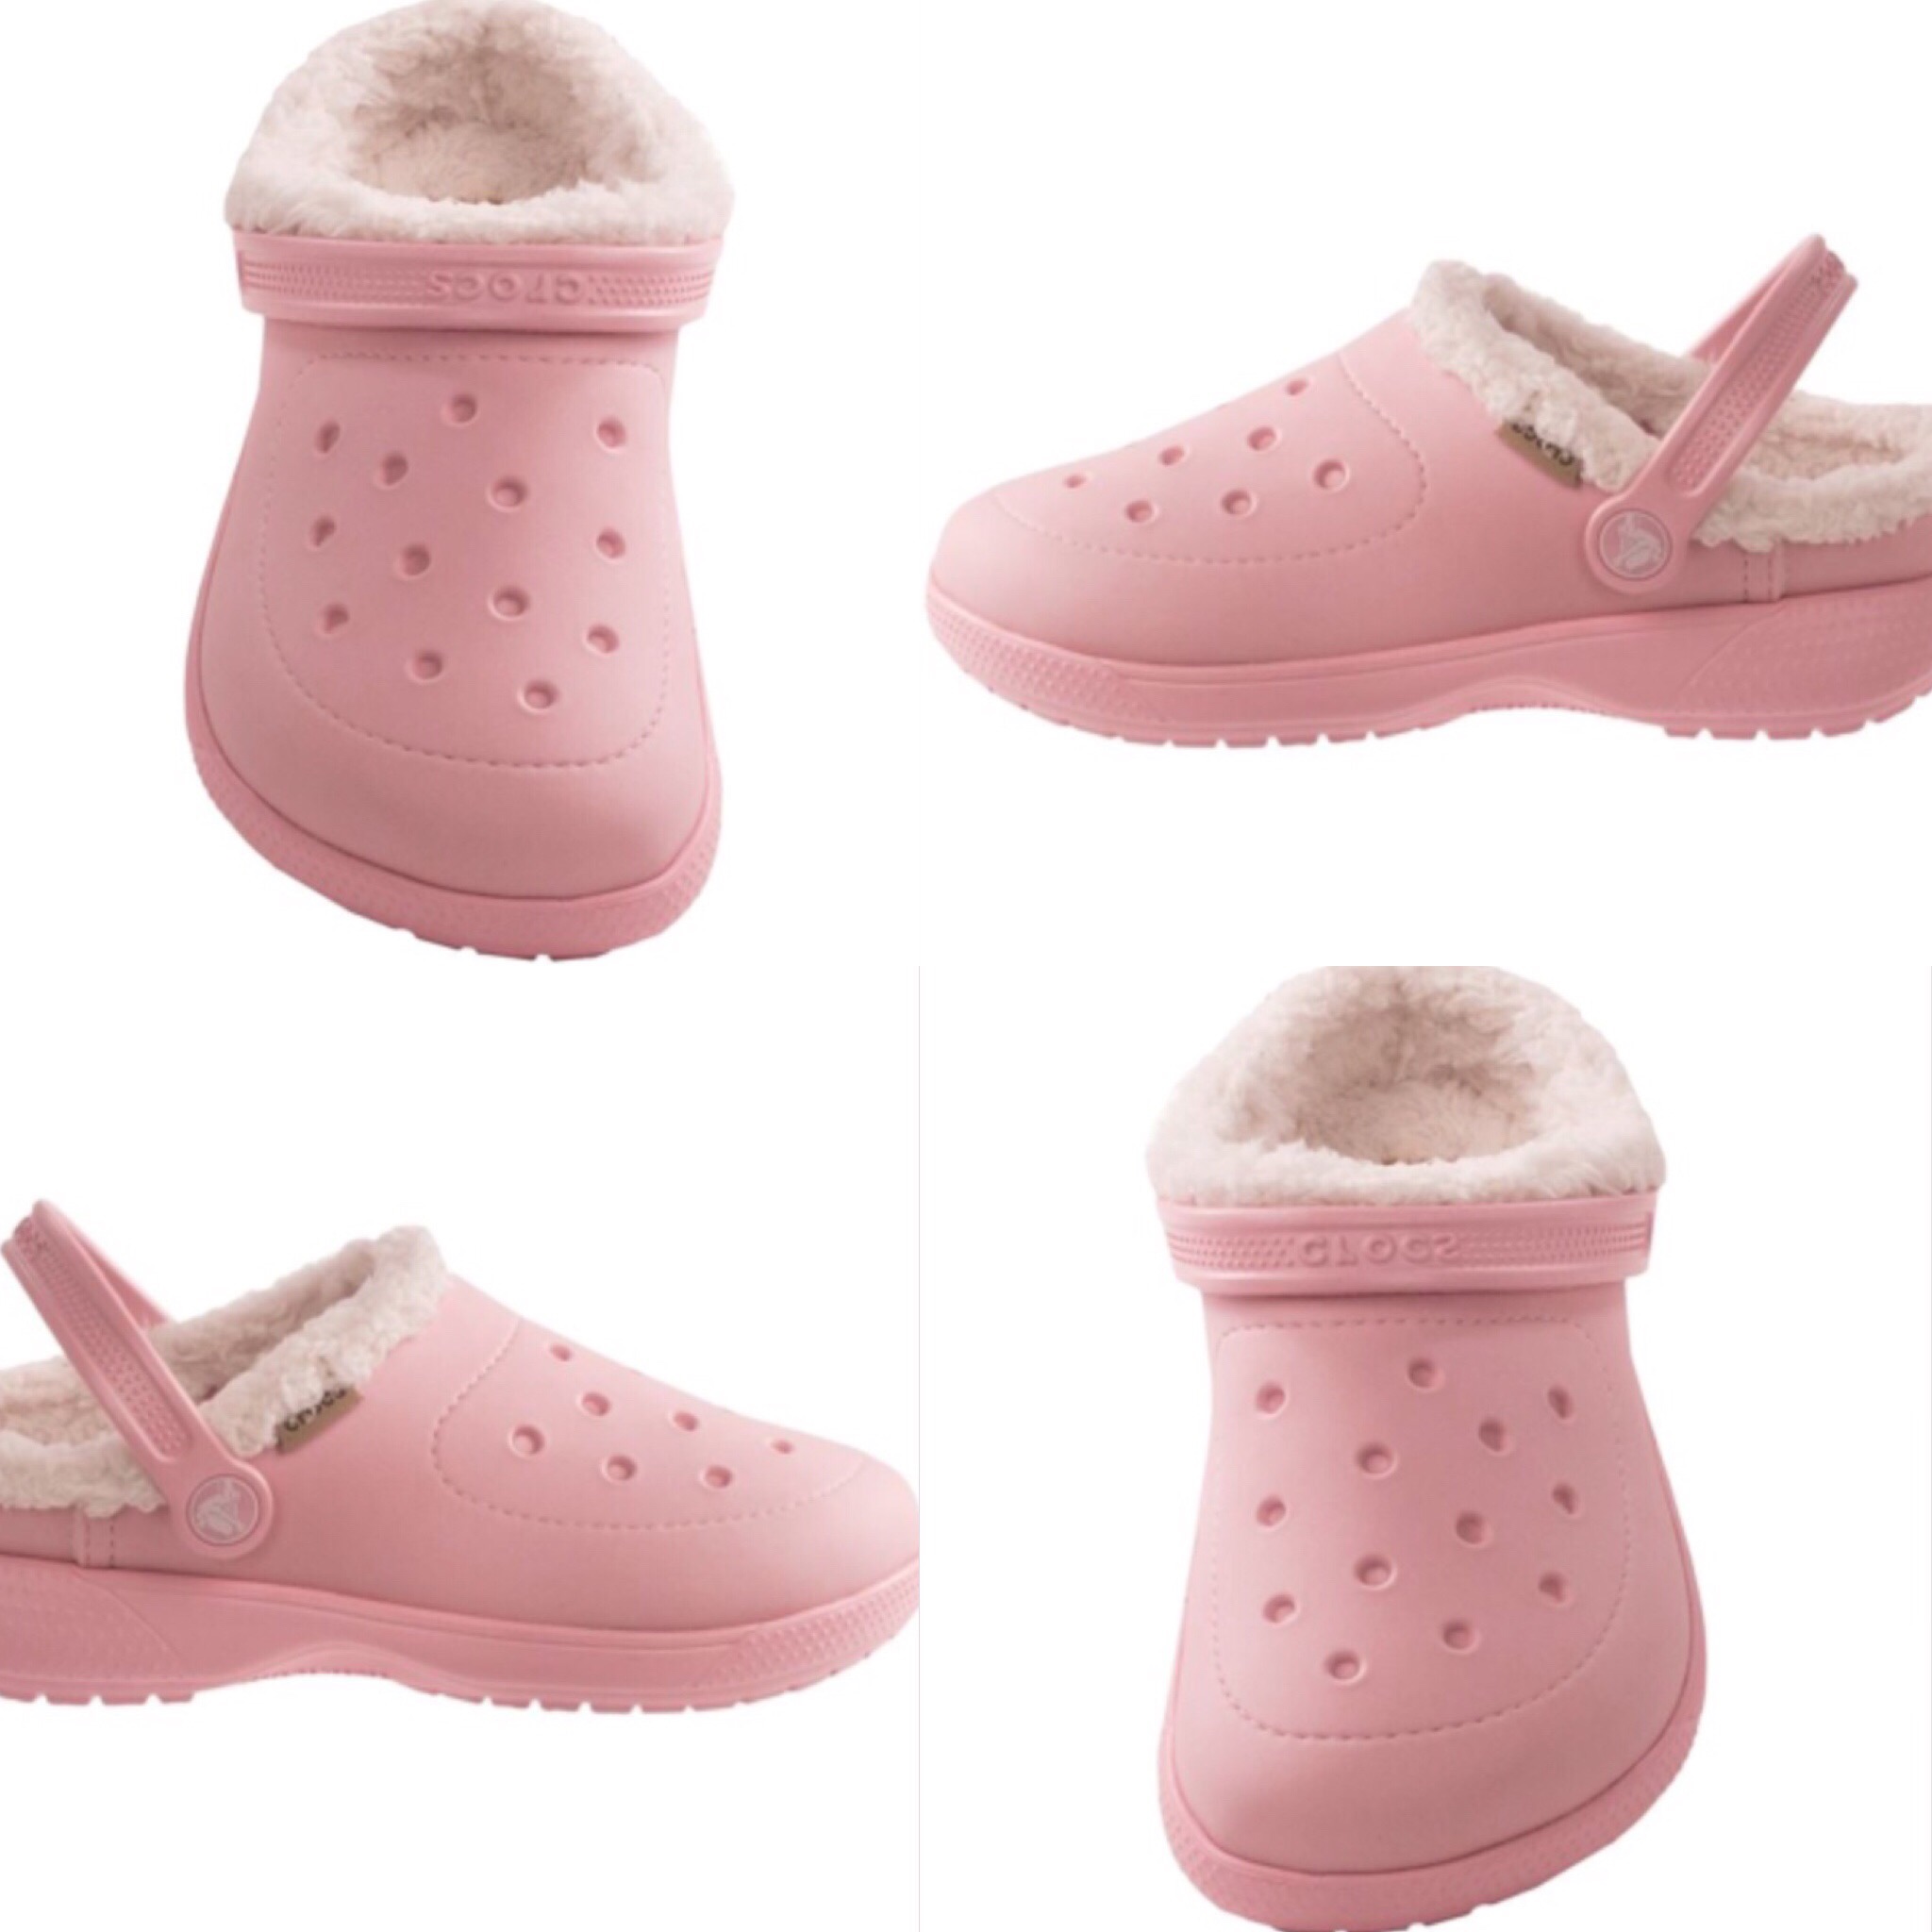 what are the things you put on crocs called